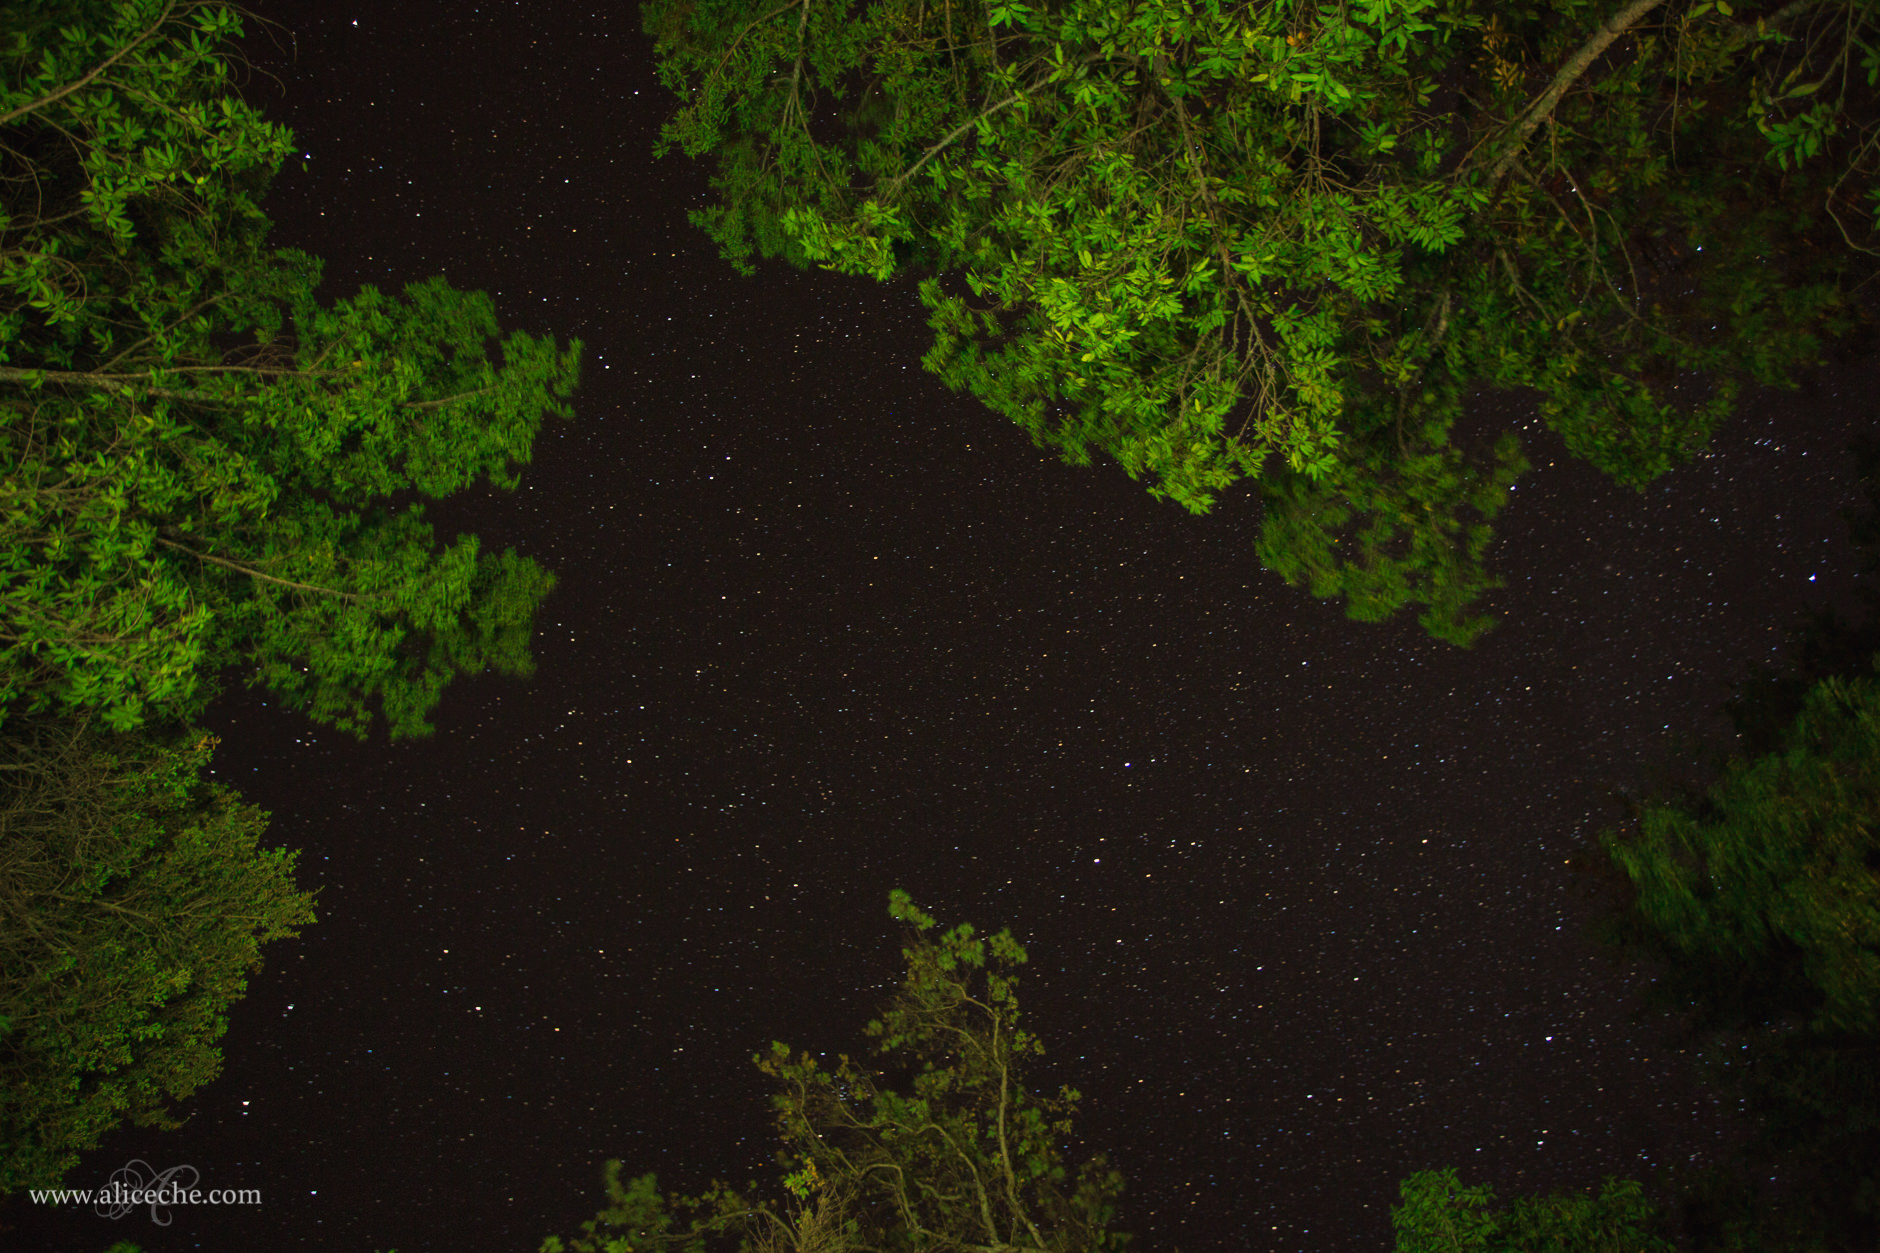 alice-che-photography-big-sur-pfieffer-campground-stars-in-sky